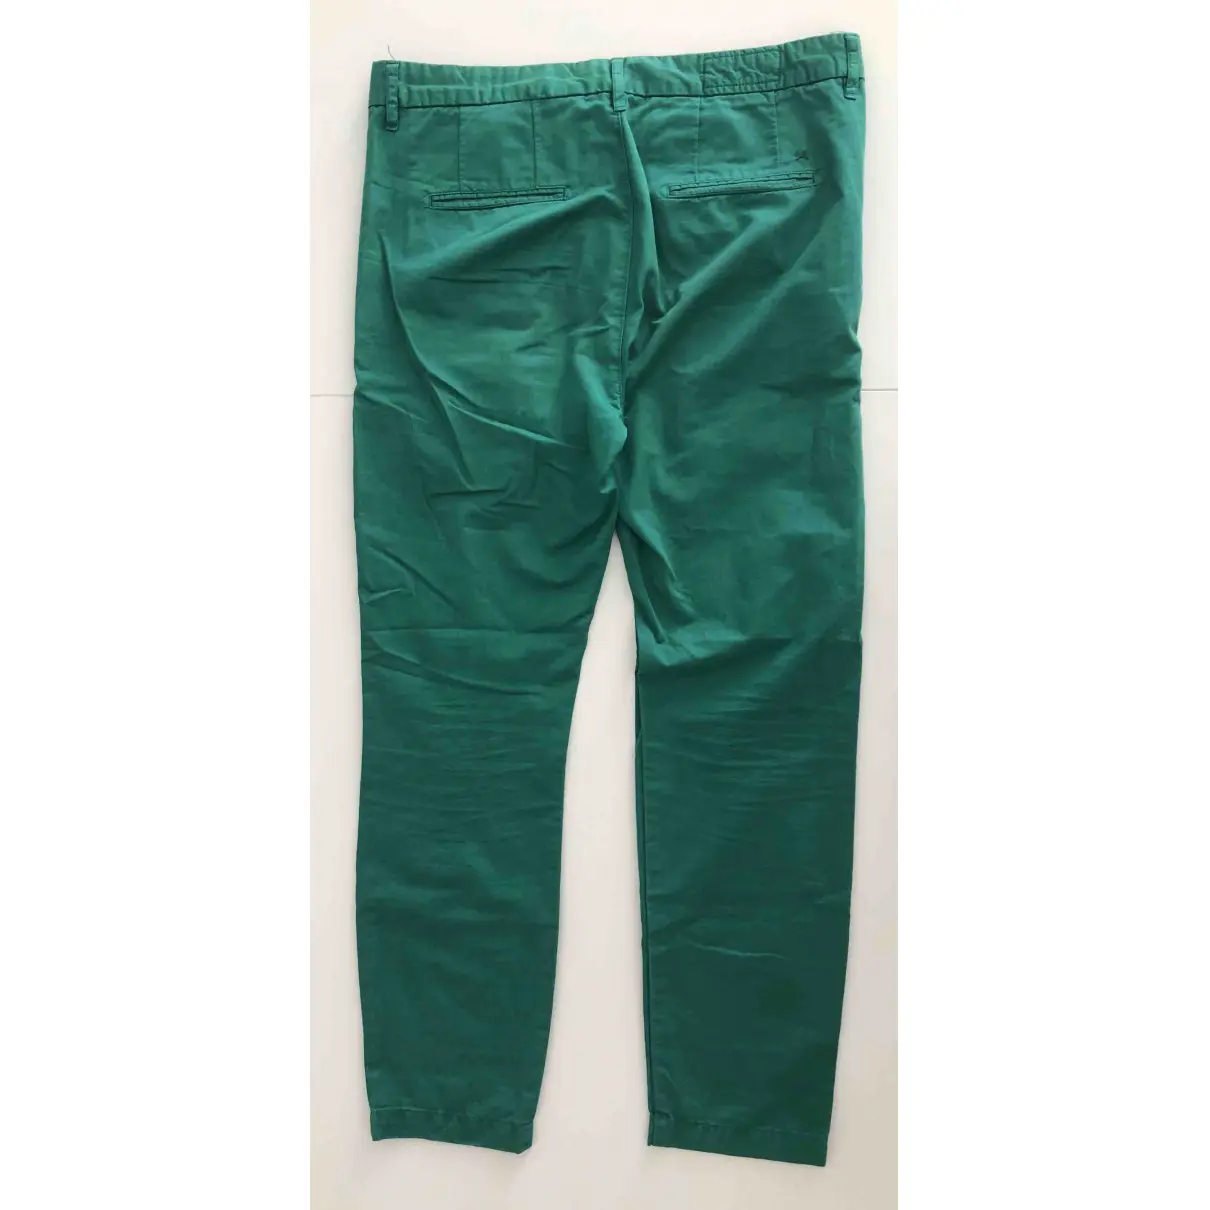 Buy Closed Chino pants online